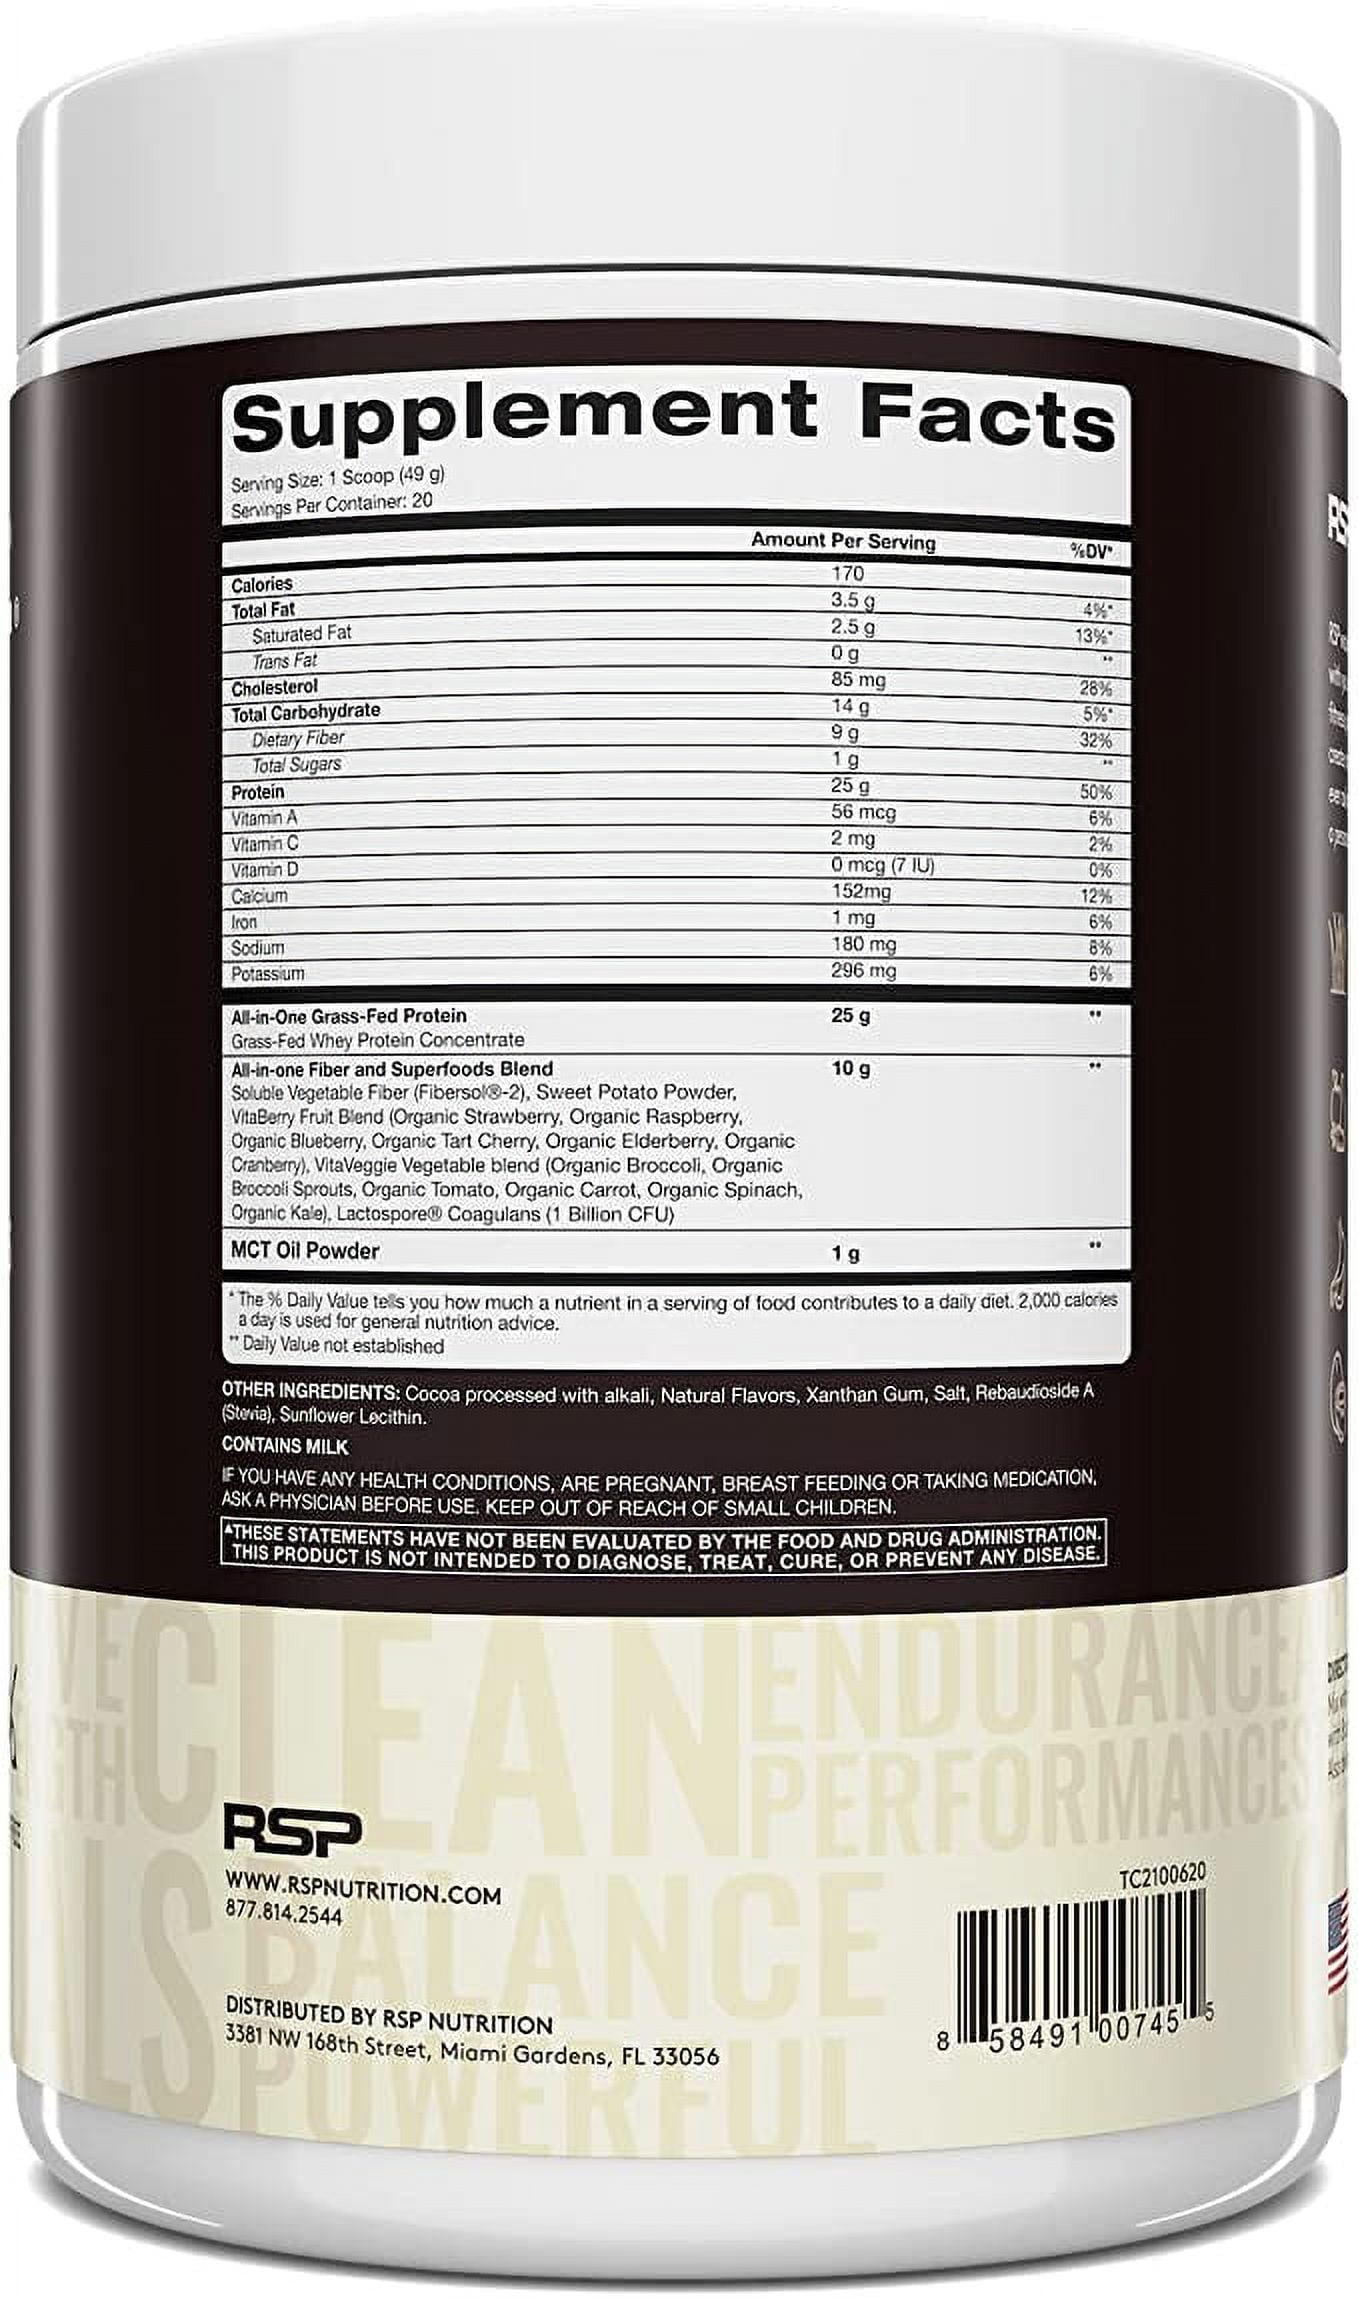 TrueFit Meal Replacement Shakes Powder, Grass Fed Whey Protein, Chocolate,  2 lb 